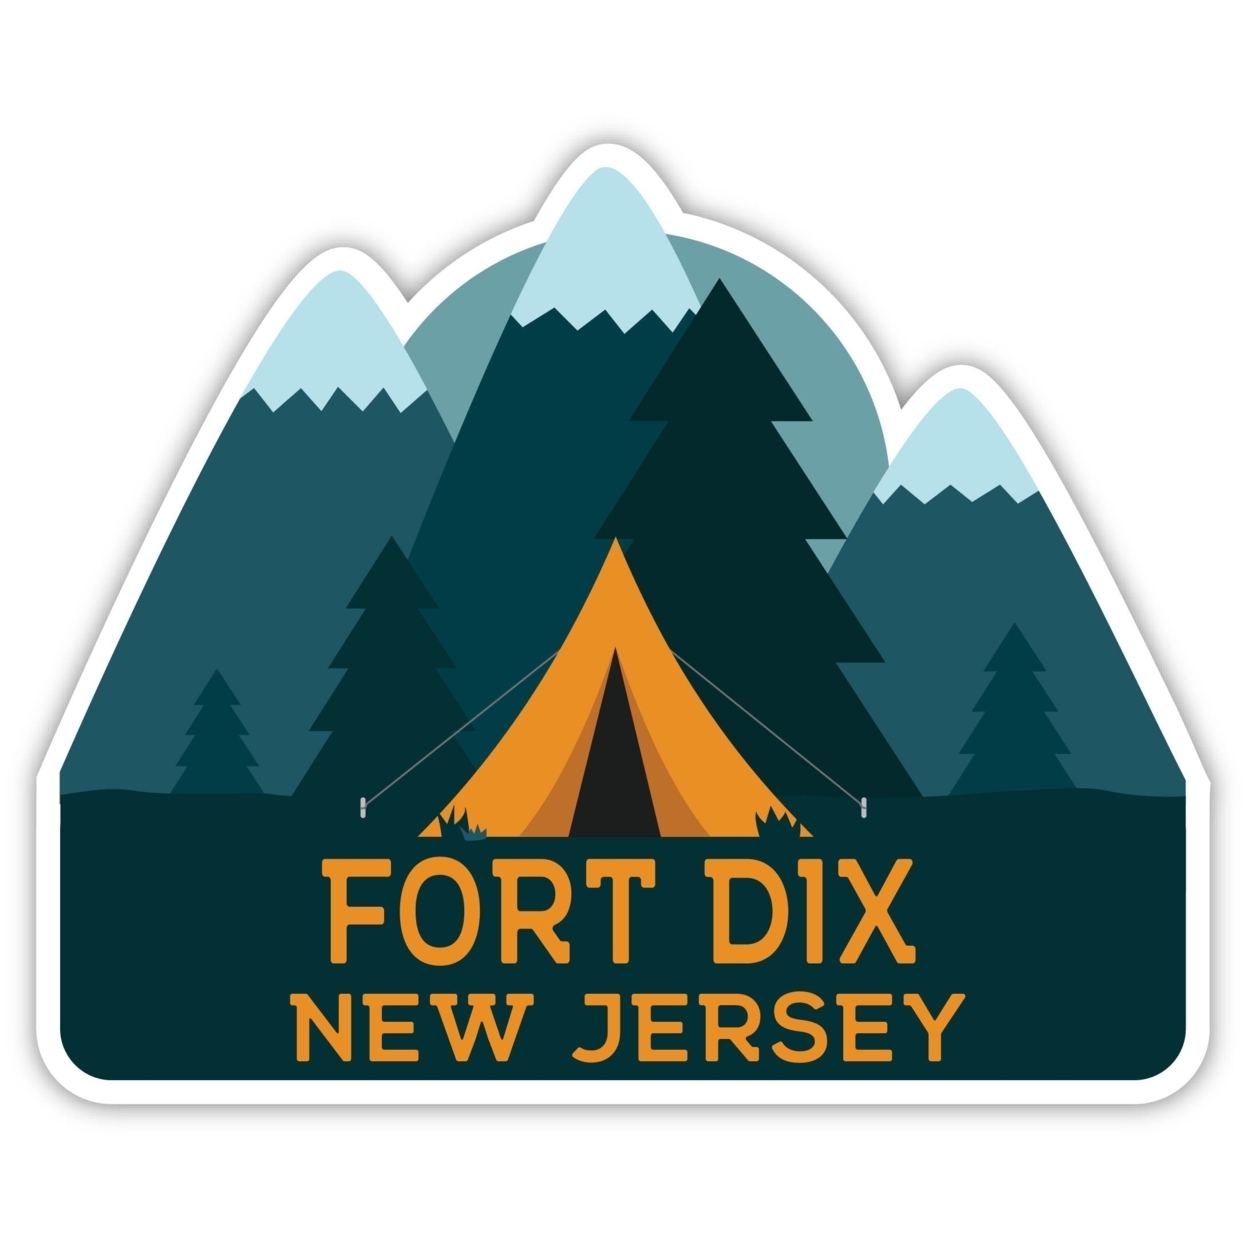 Fort Dix New Jersey Souvenir Decorative Stickers (Choose Theme And Size) - 4-Pack, 6-Inch, Tent